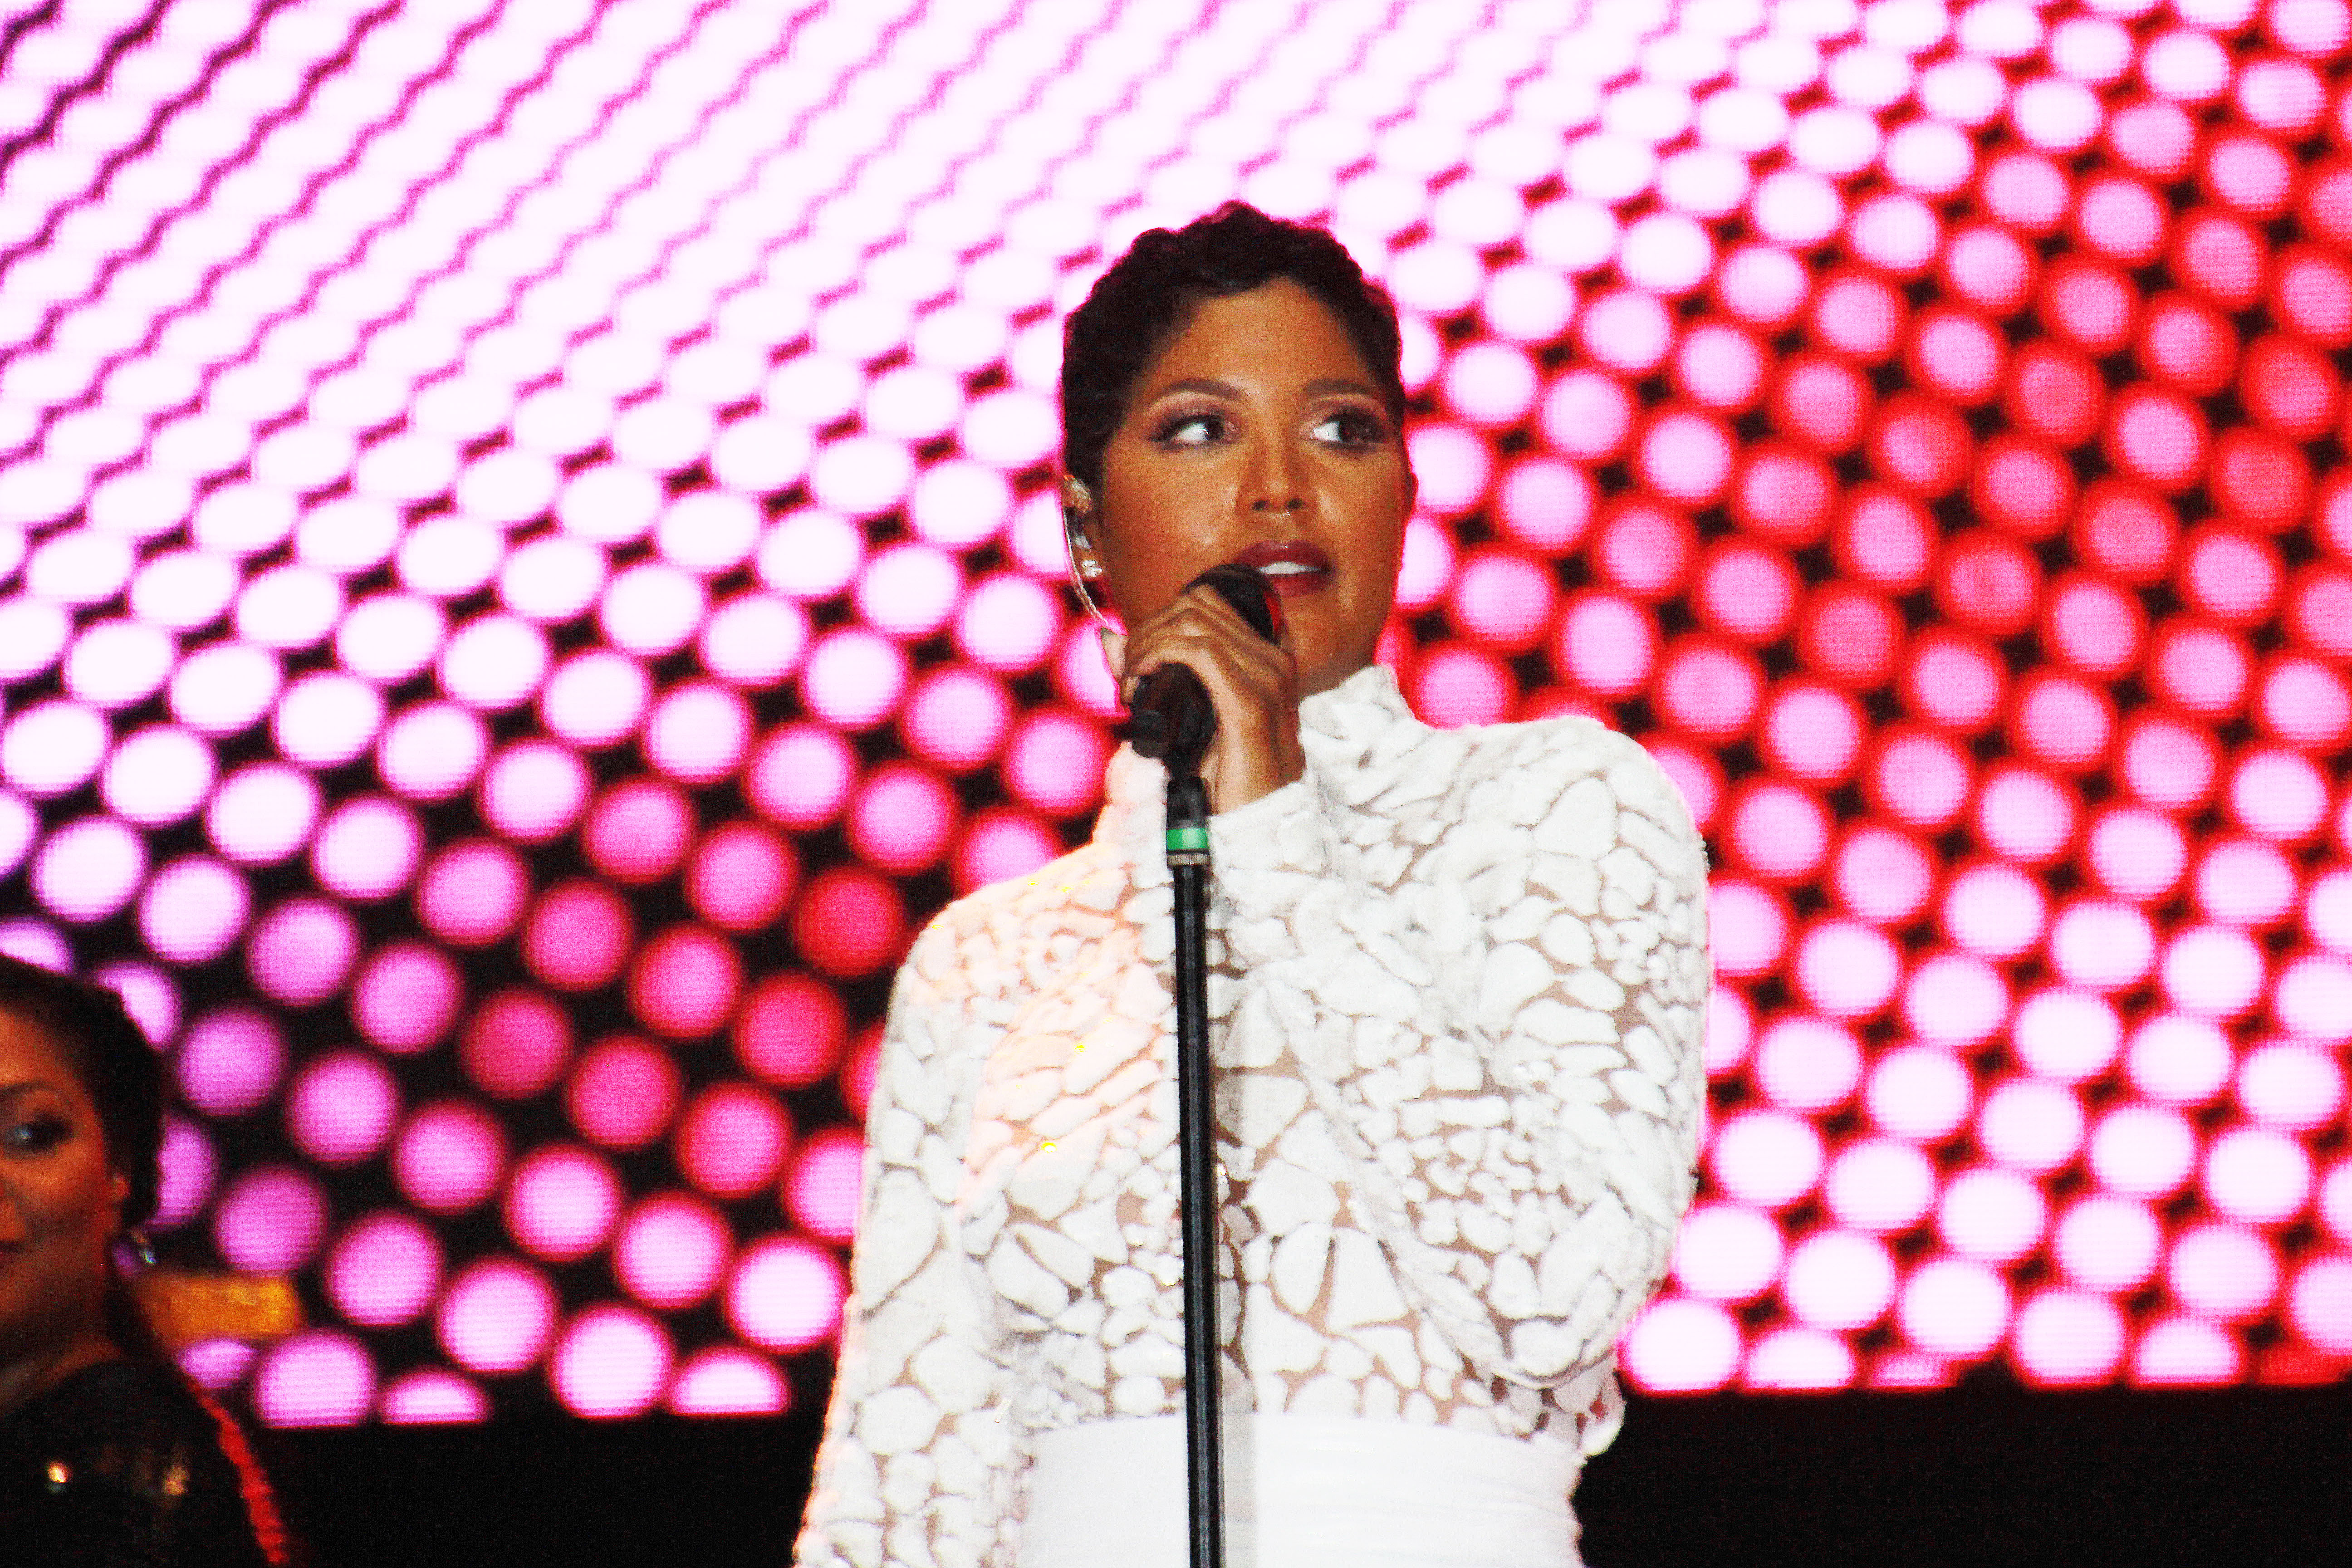 Toni Braxton wowed her many fans with timeless hits as "Un-break My Heart."